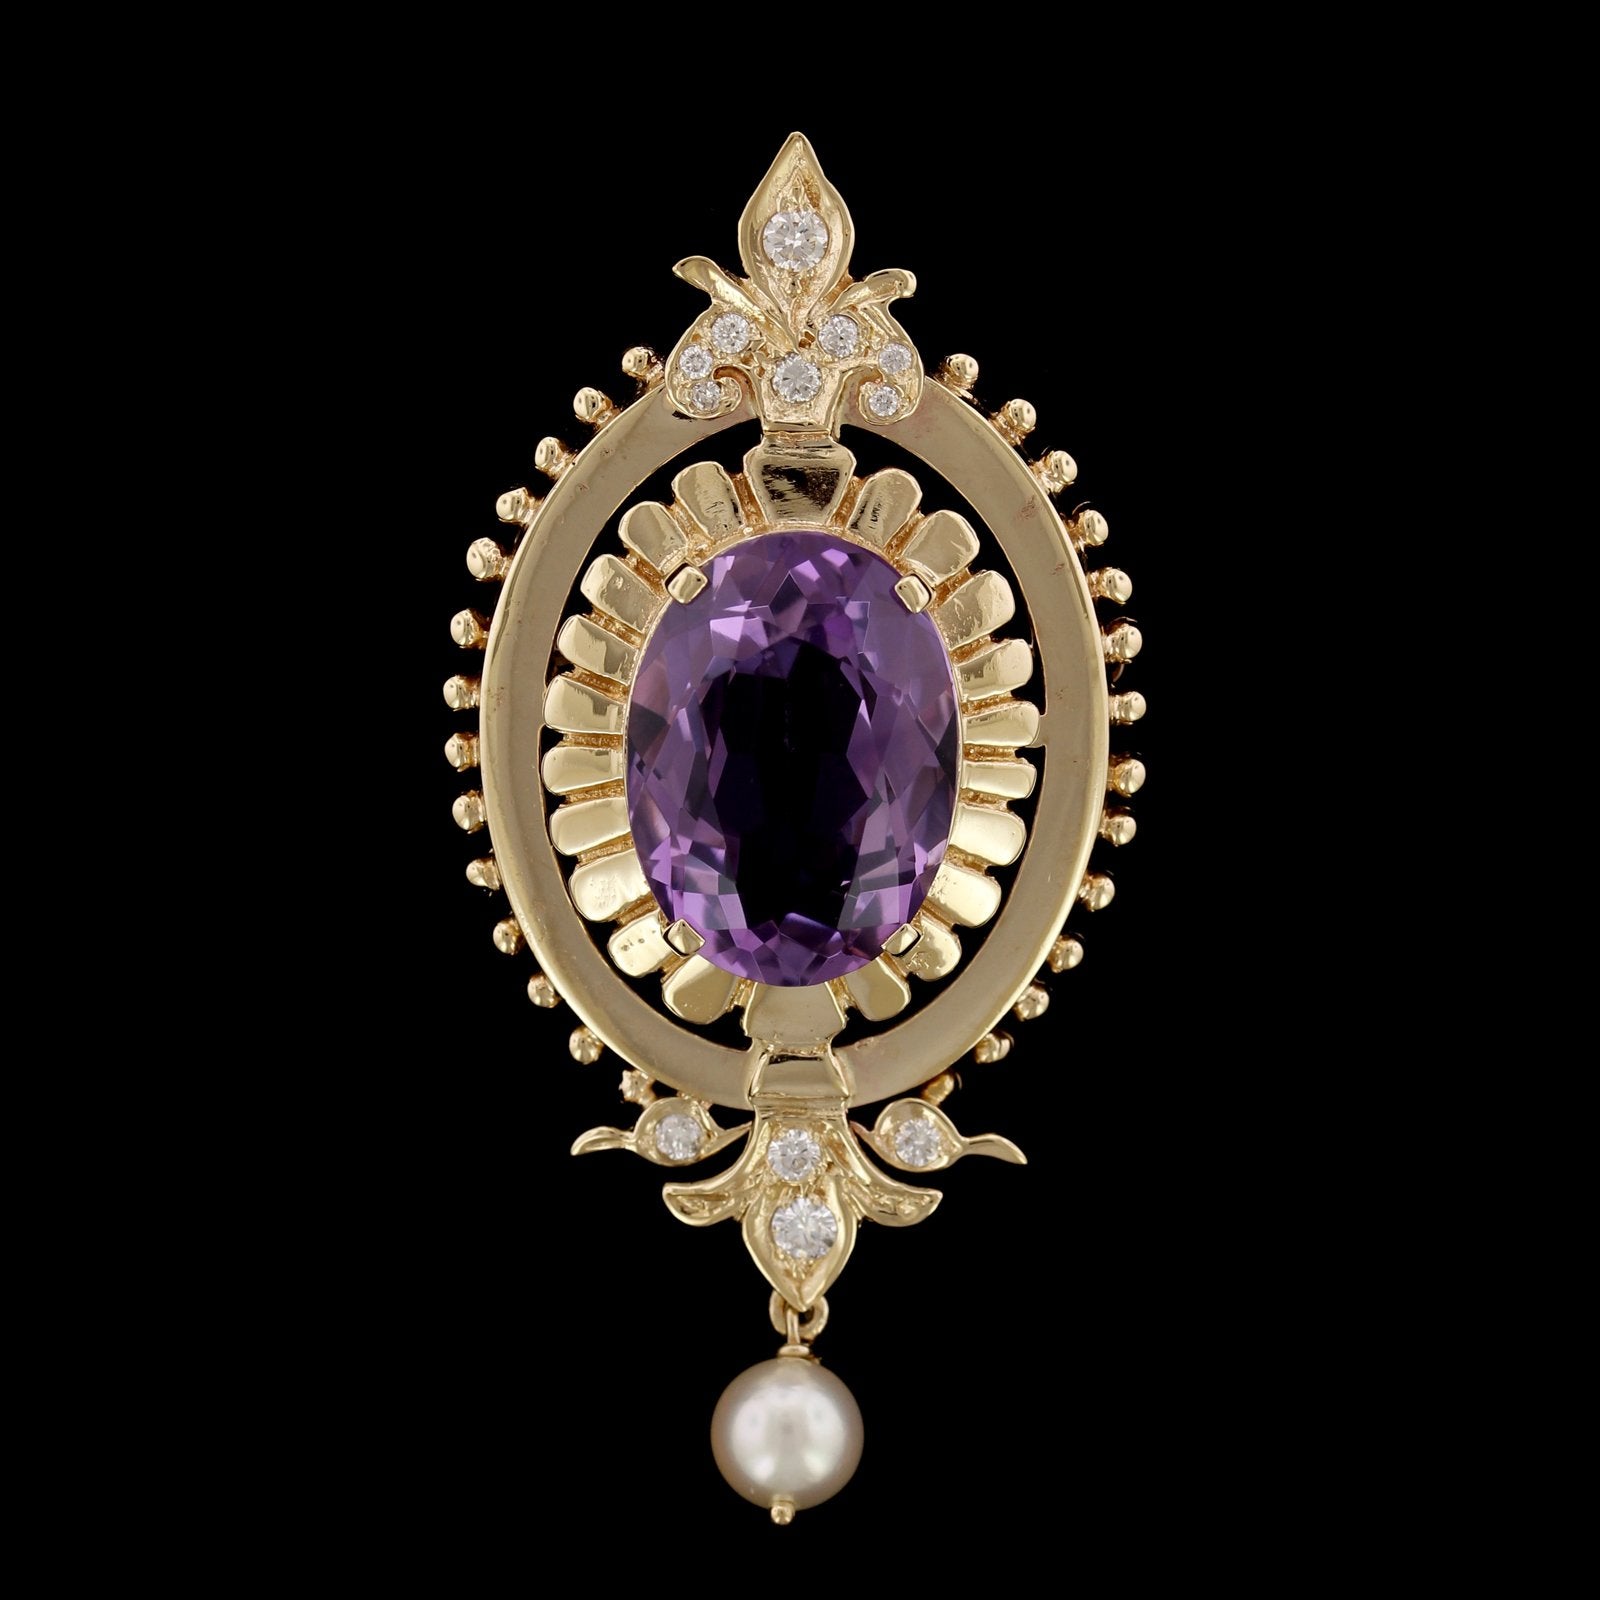 14K Yellow Gold Estate Amethyst, Cultured Pearl and Diamond Pin/Pendant